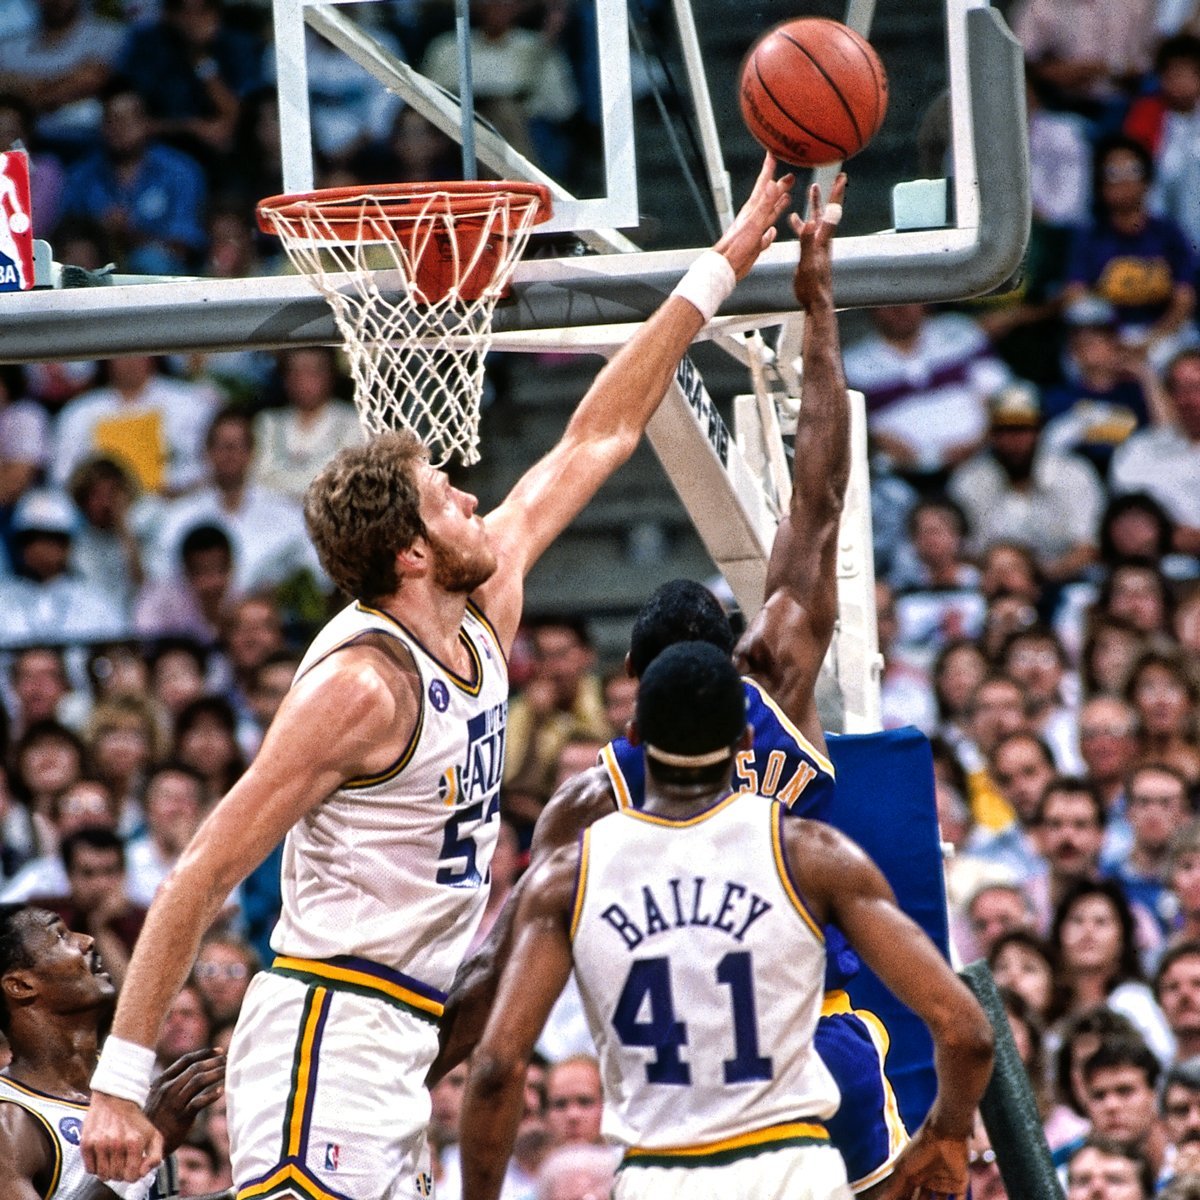 1984: Mark Eaton (1)Actual DPOY: MoncriefNo standout.Eaton:1st DBPM (3.7)1st BLK% (8.5)T-10th DRtg (102)T-23rd DWS (3.5)Eaton's Jazz T-12th in DRtg (108.0). Knicks 1st (103.1). NBA ave of 107.6.Contenders:BirdRollinsListerMahornSikmaMoncrief